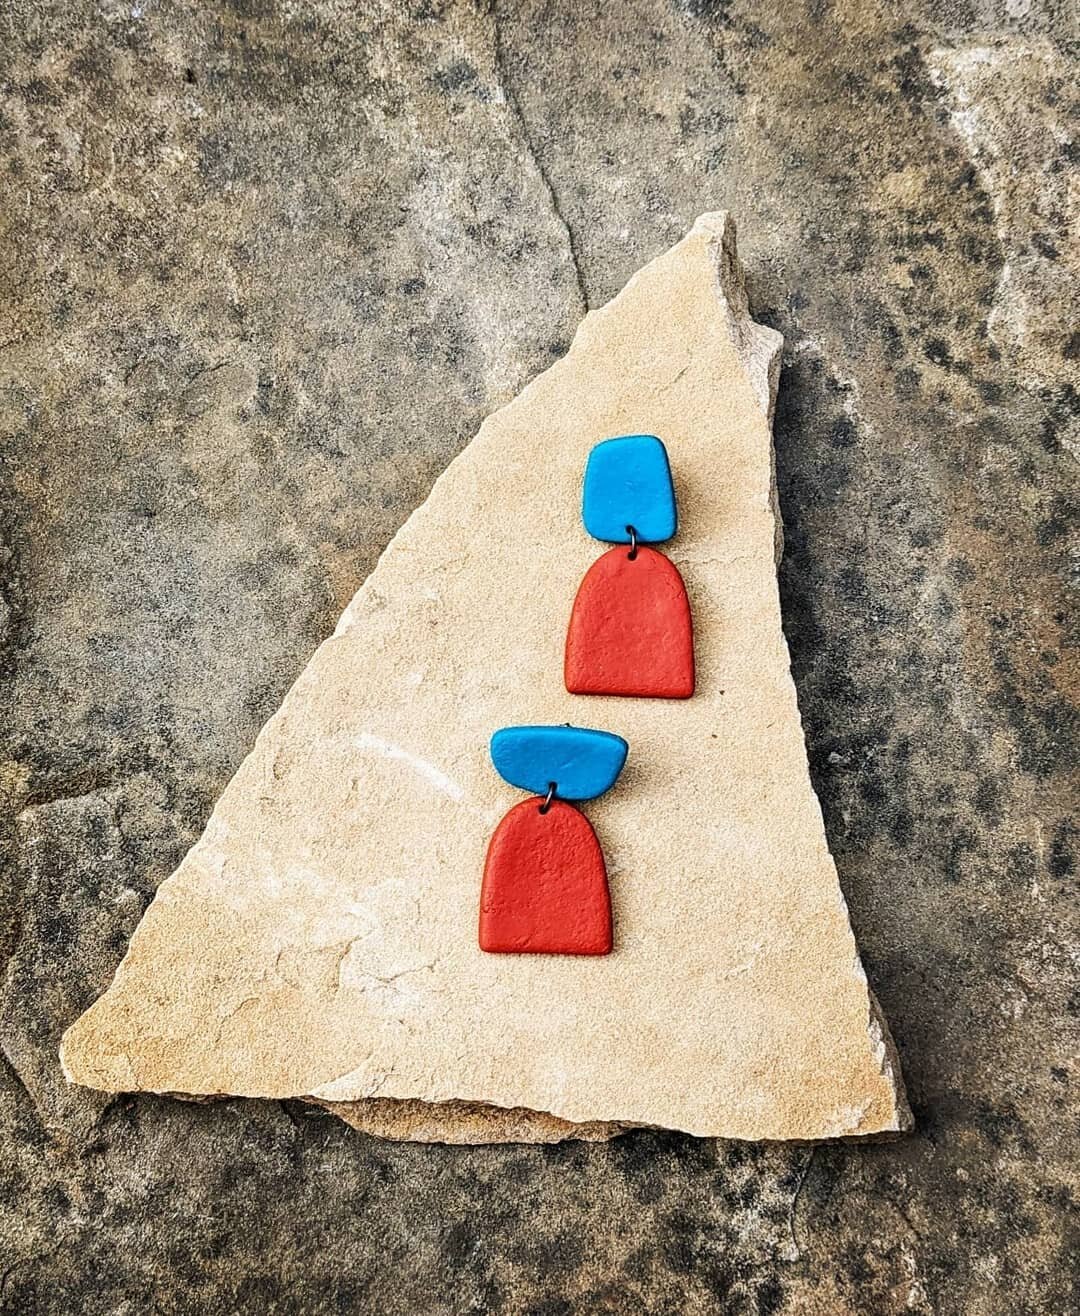 Come check out the great selection of makers today, from 11am-5pm, presented by @fogcityflea!! 

Shown here are beautiful polymer clay earrings by @adriannagluckjewelry, her newest collection of vibrant colors and shapes!